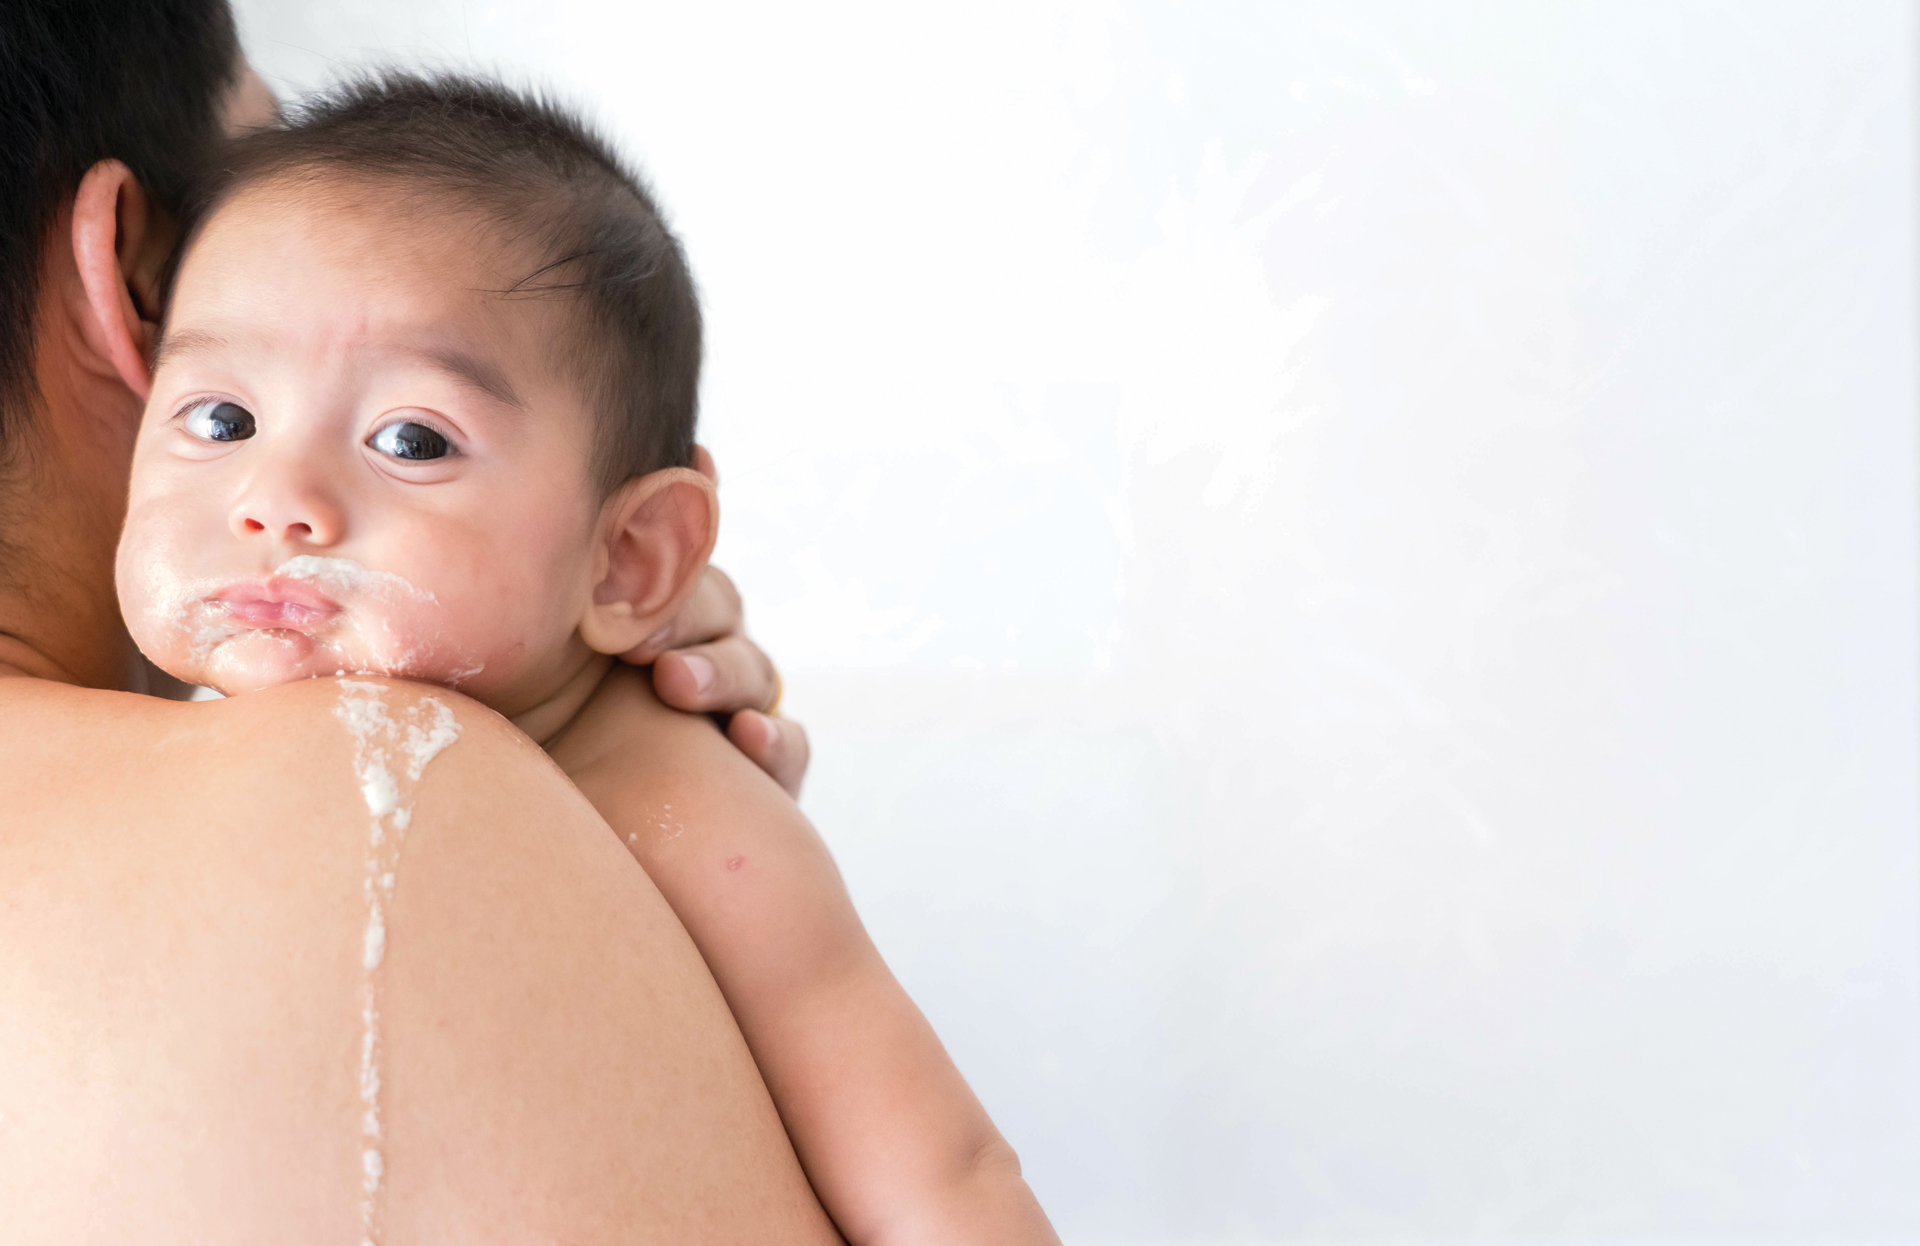 A Parent’s Guide to Reflux